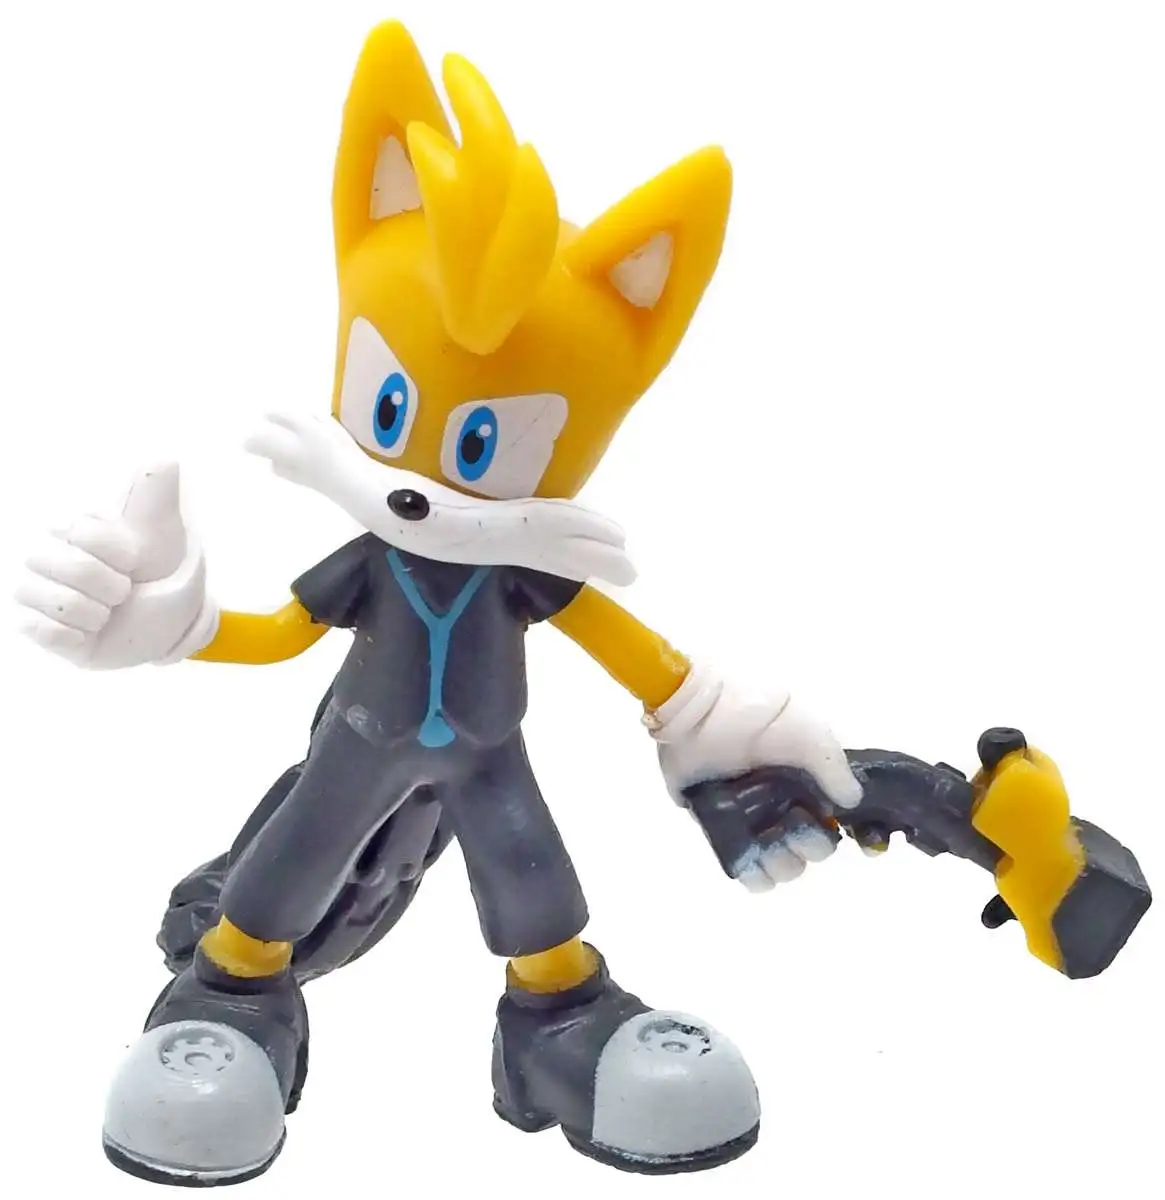  Sonic Prime 5 Nine Tails Action Figure : Toys & Games